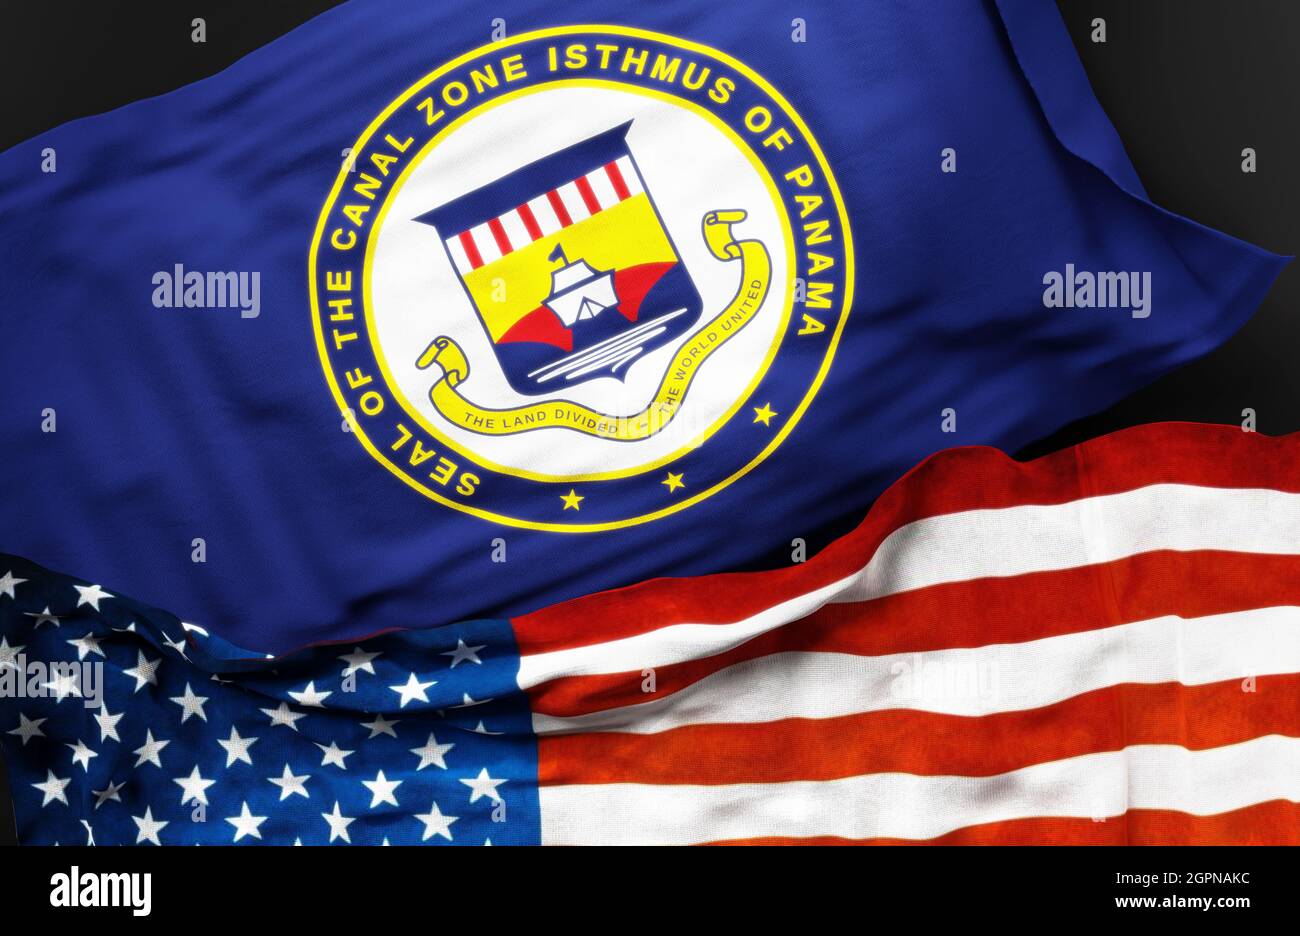 Flag of Panama Canal Zone along with a flag of the United States of America as a symbol of unity between them, 3d illustration Stock Photo